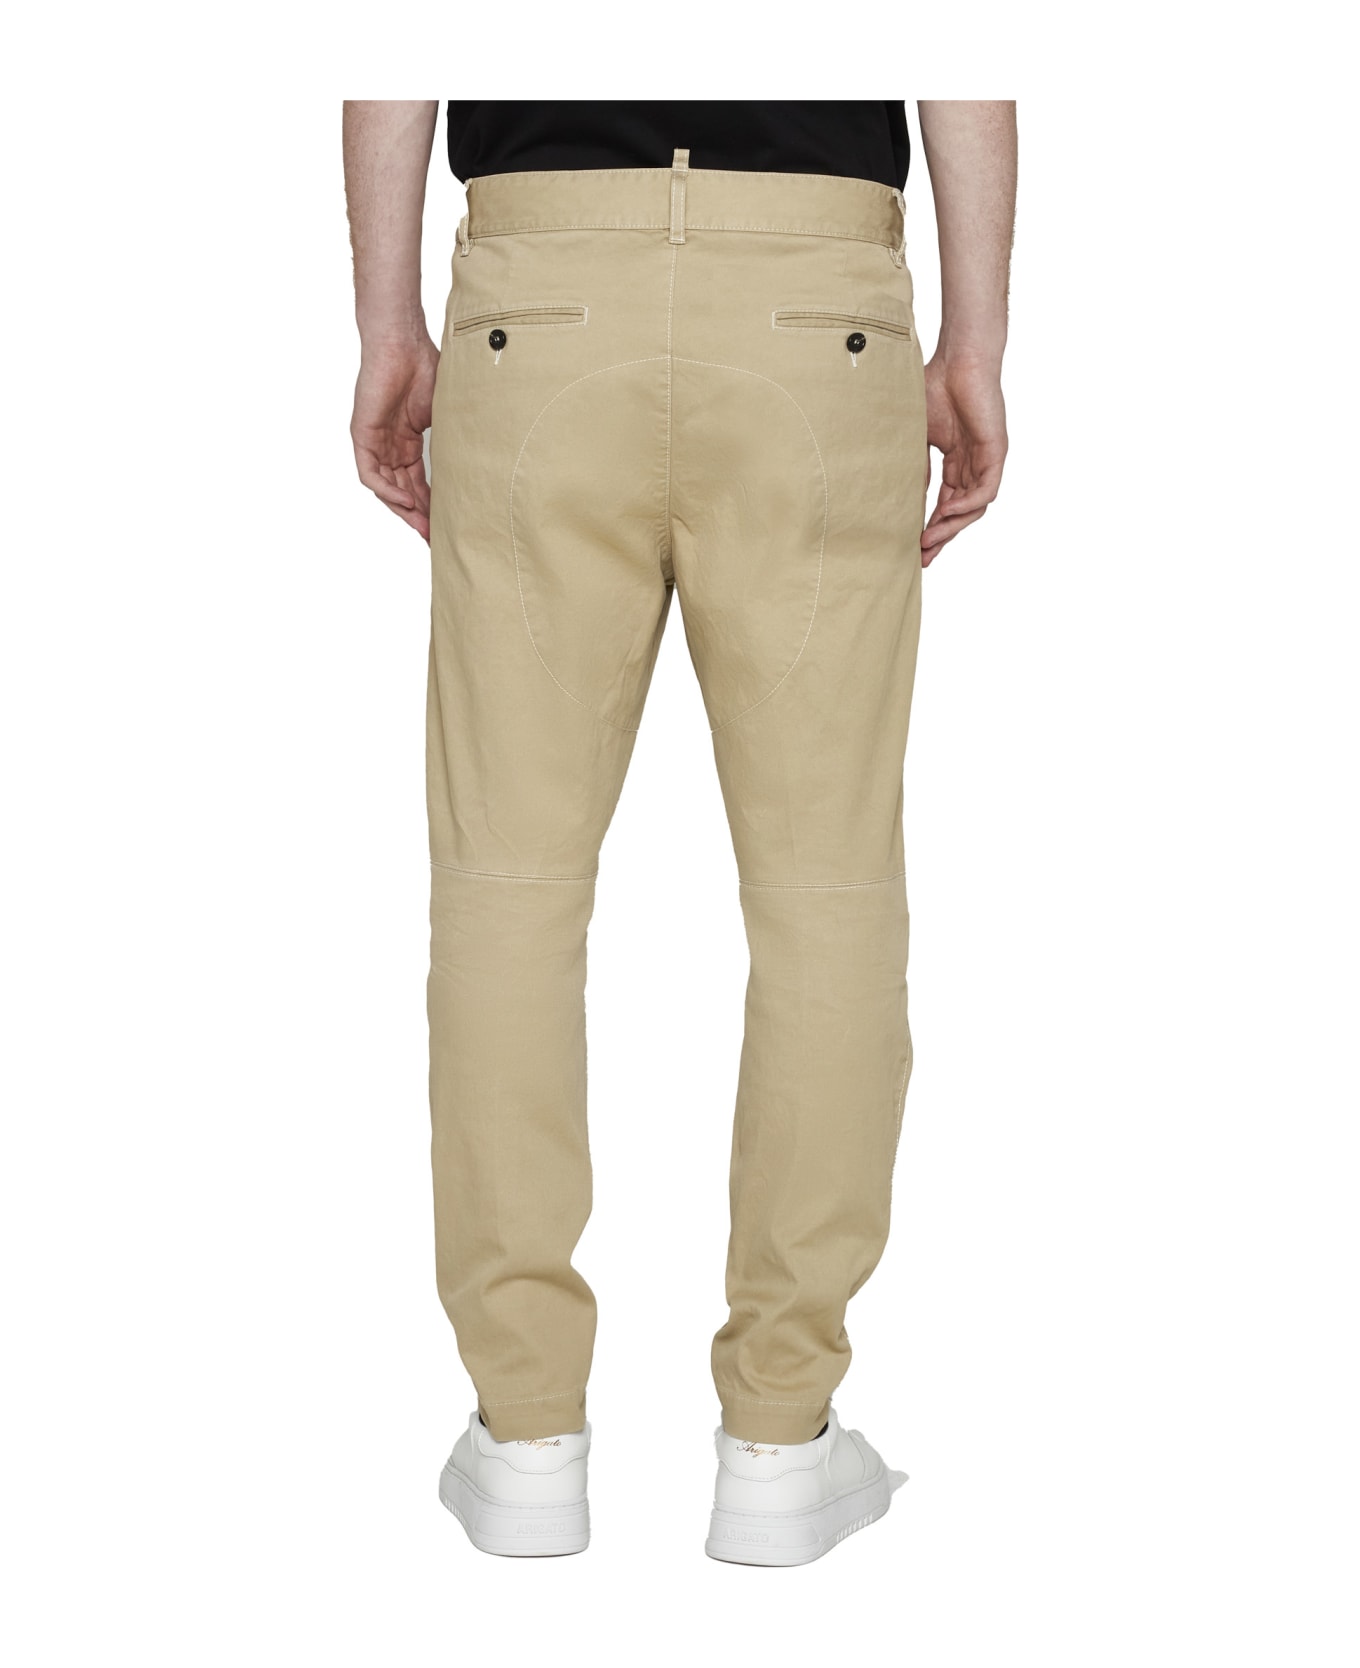 Dsquared2 Buttoned Zip Chino Trousers - Nude & Neutrals ボトムス